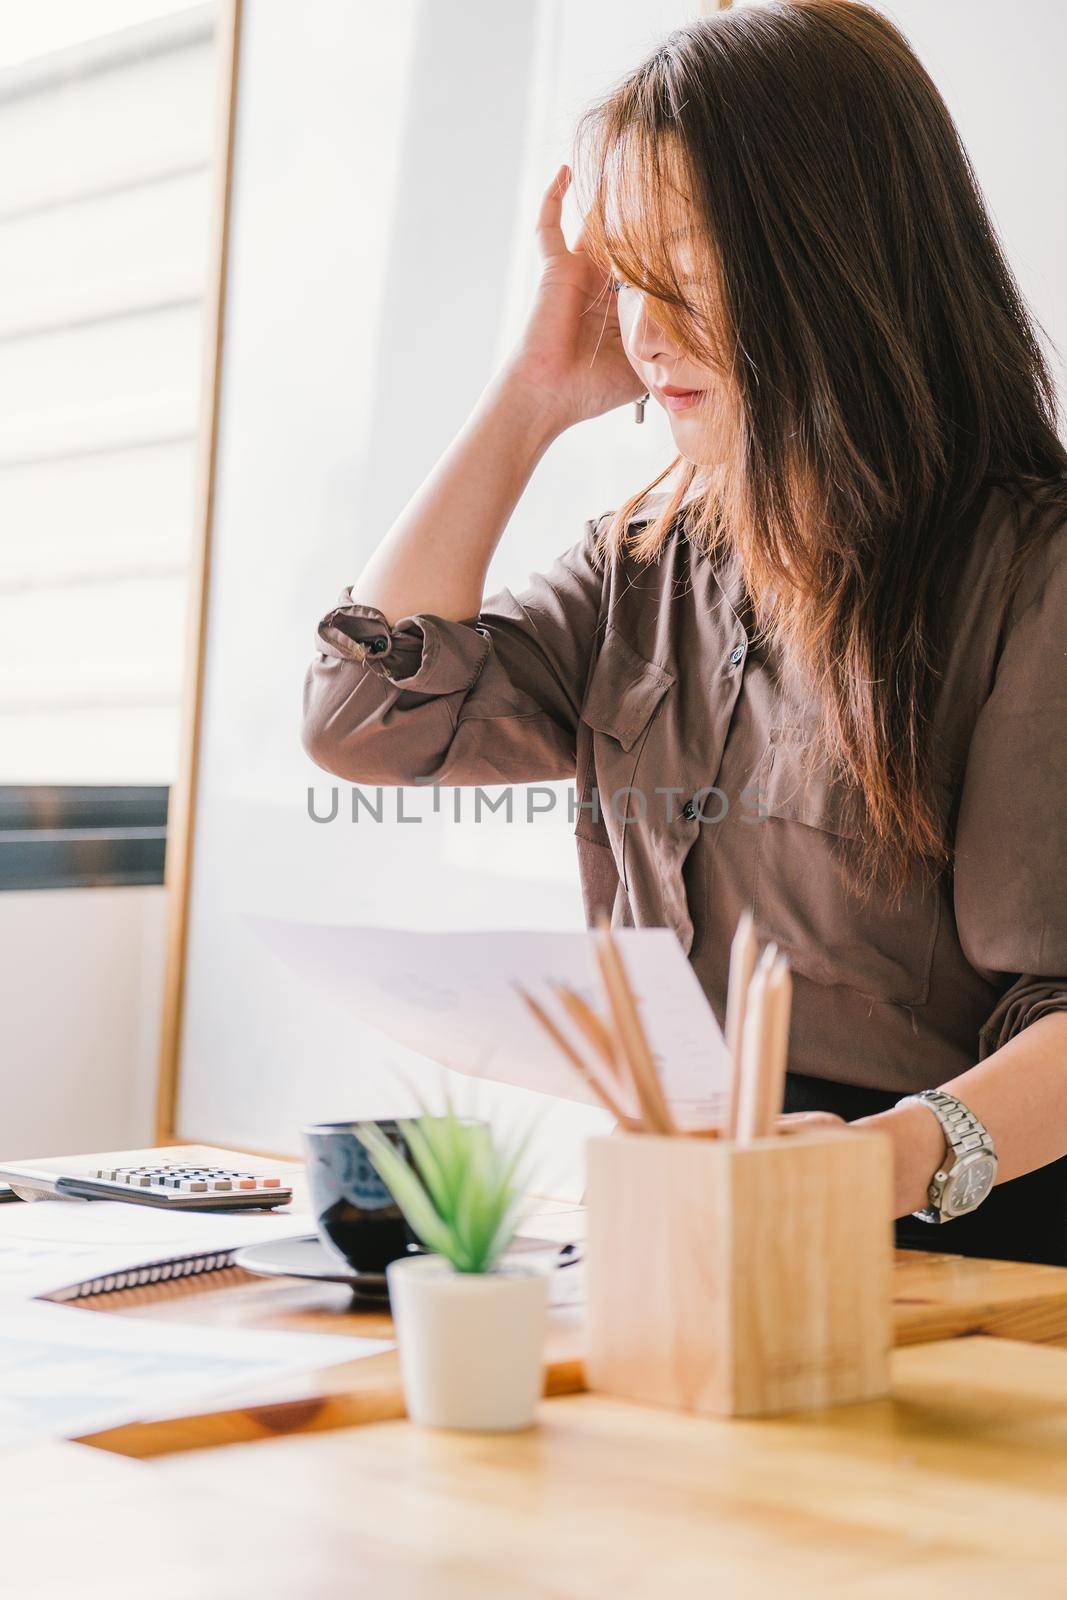 Portrait of business woman working with financial documents and calculator for marketing analysis.